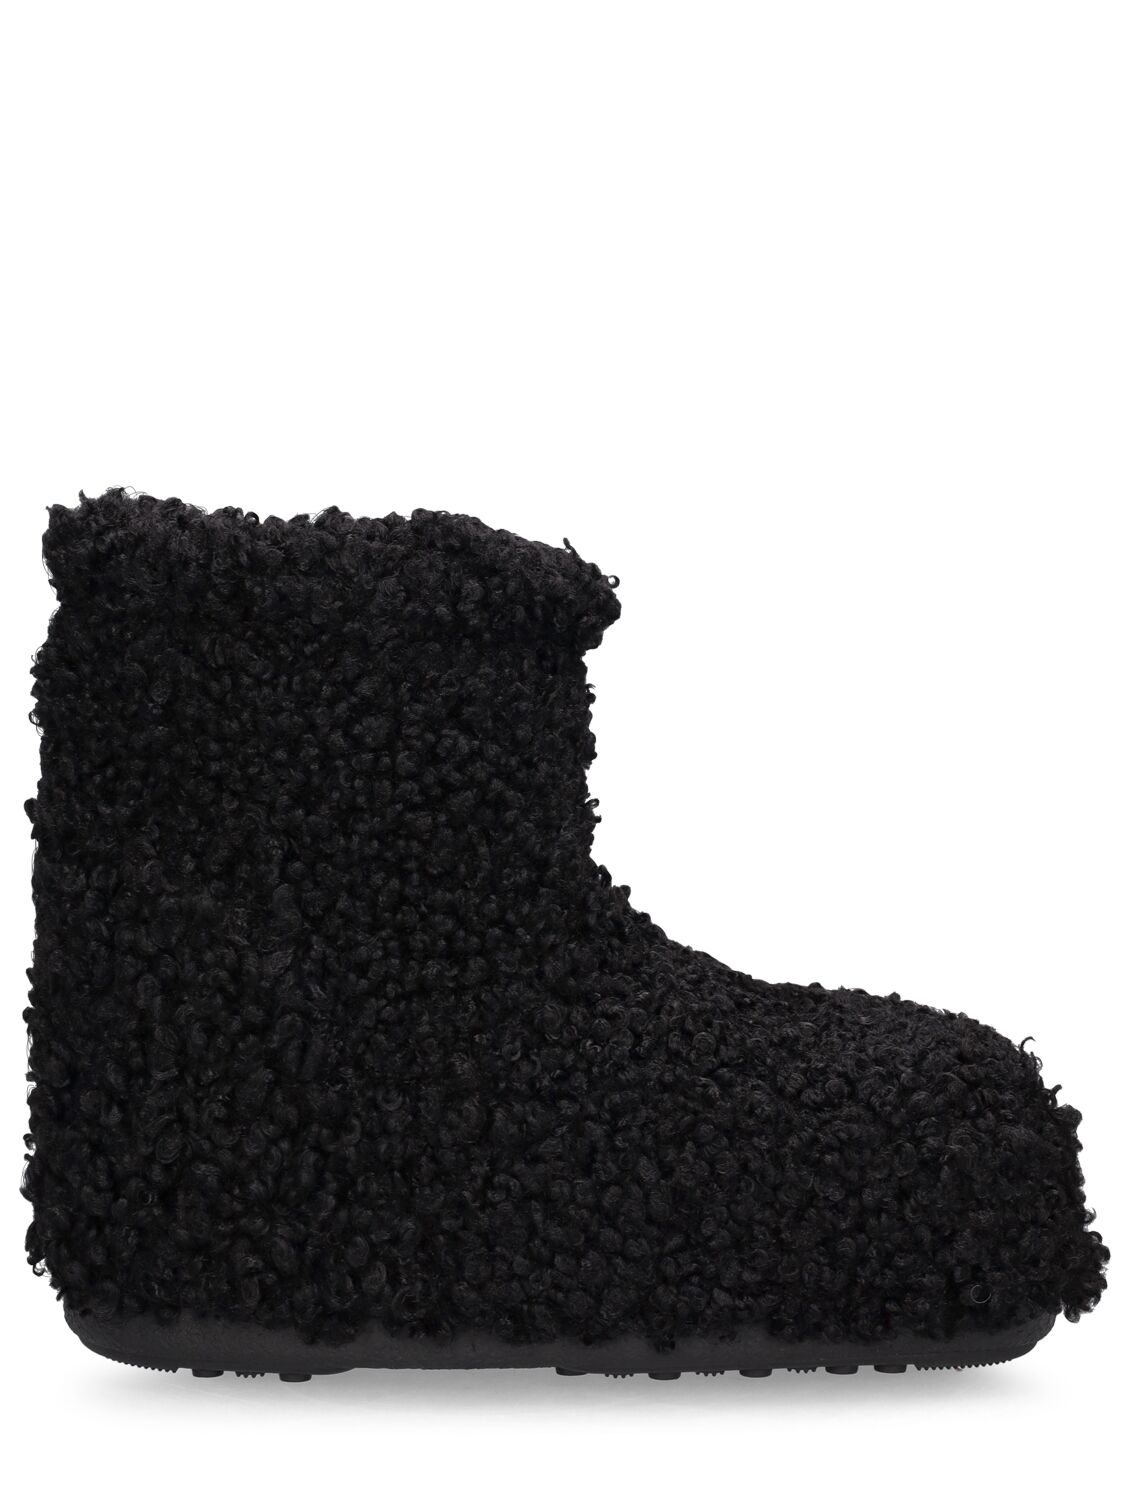 Moon Boot Icon Low Black Faux-fur Boots Black 18516697 - Ariano Boutique -  Luxury and Elegant Online Shop